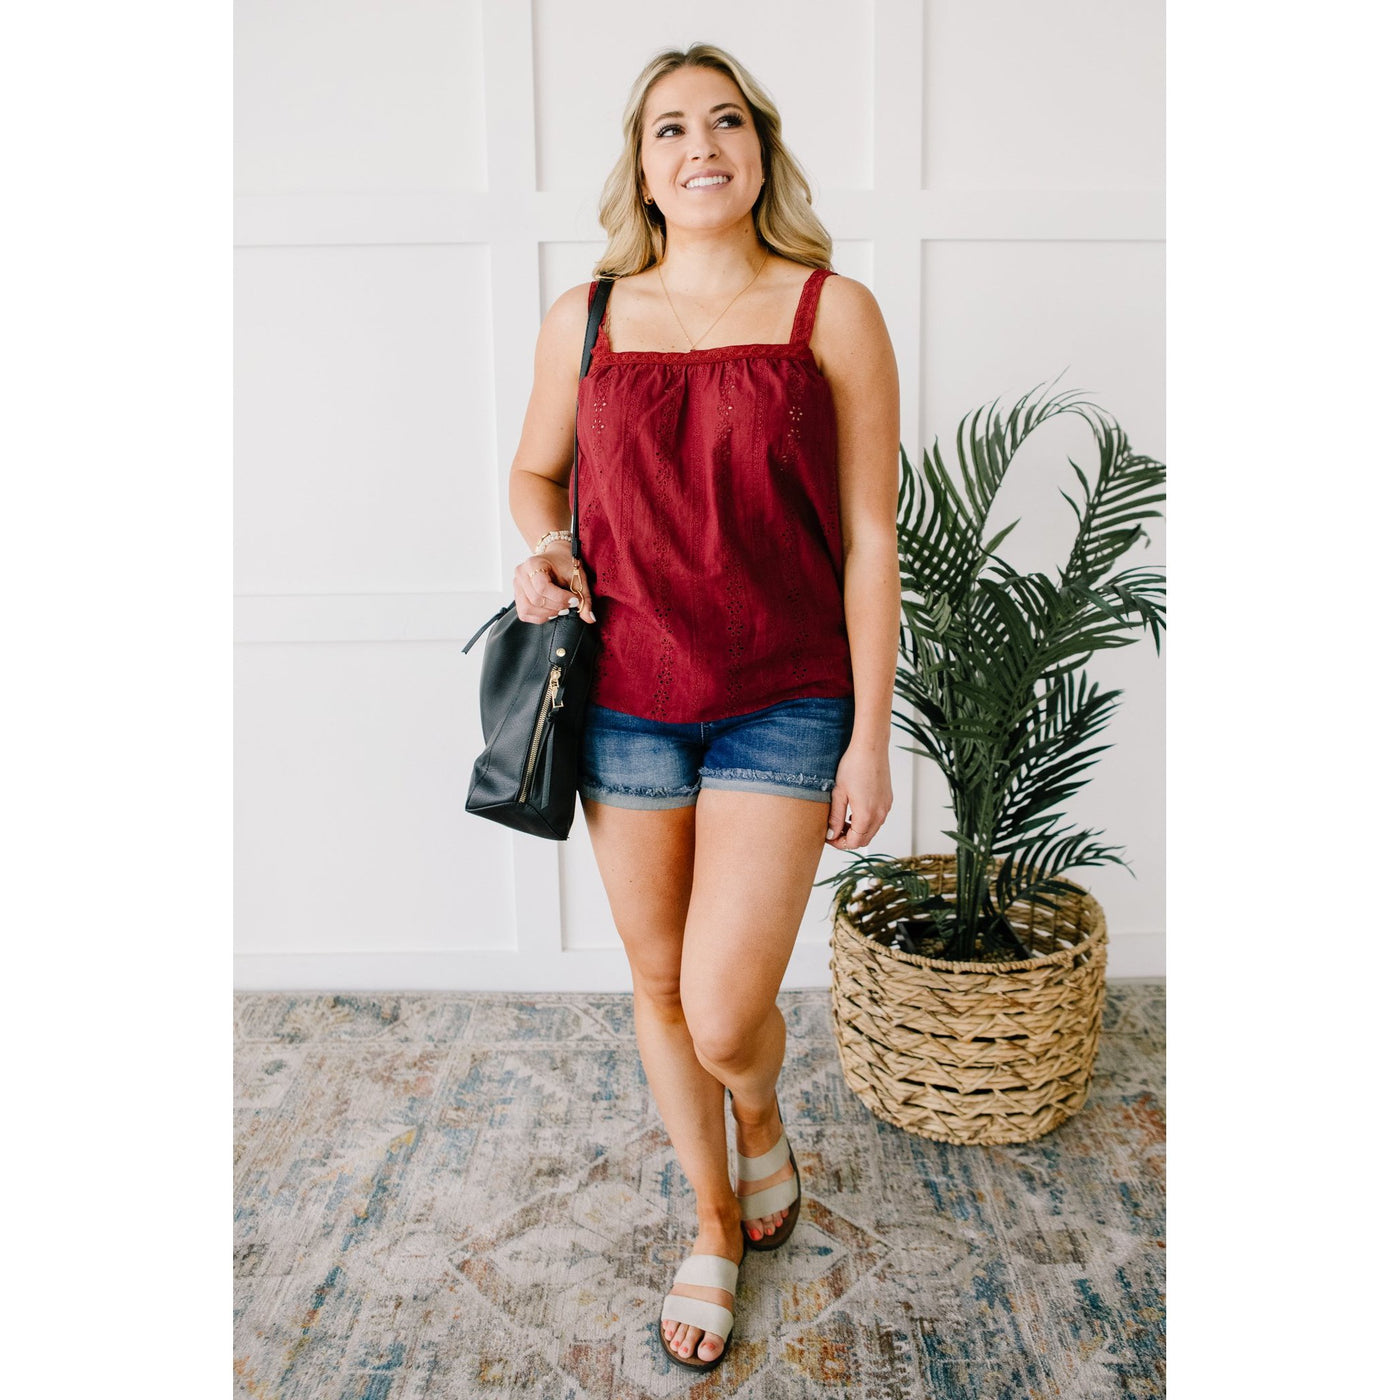 Eyelet You Know Camisole In Burgundy-W Top-Graceful & Chic Boutique, Family Clothing Store in Waxahachie, Texas